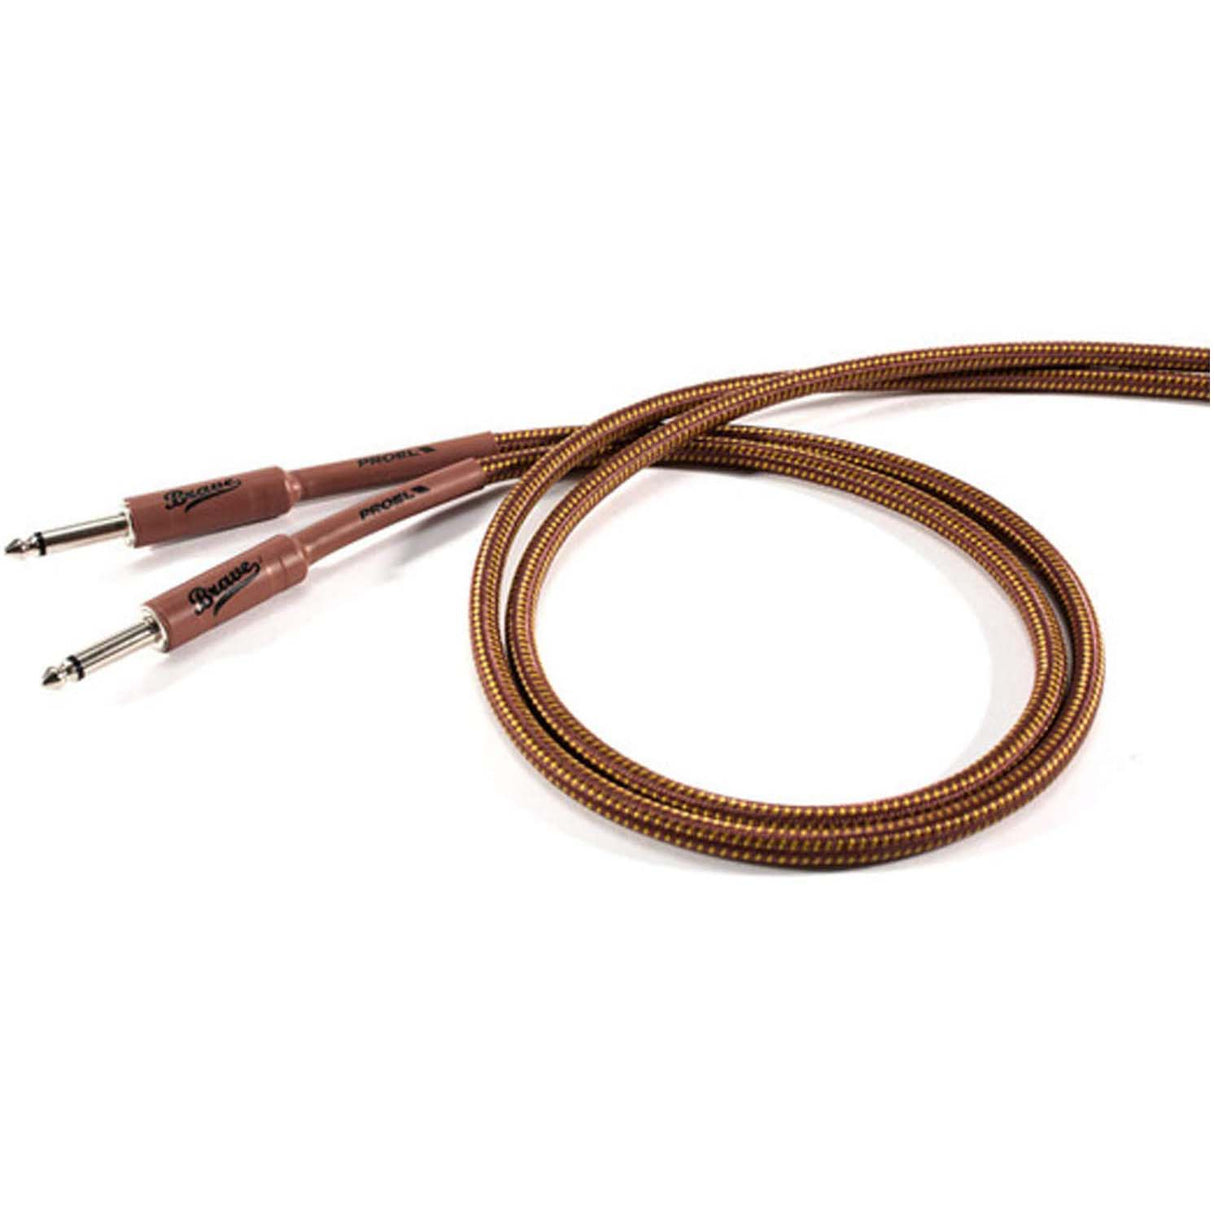 Brave Series Instrument Cables (Brown & Yellow) - Cables - Proel